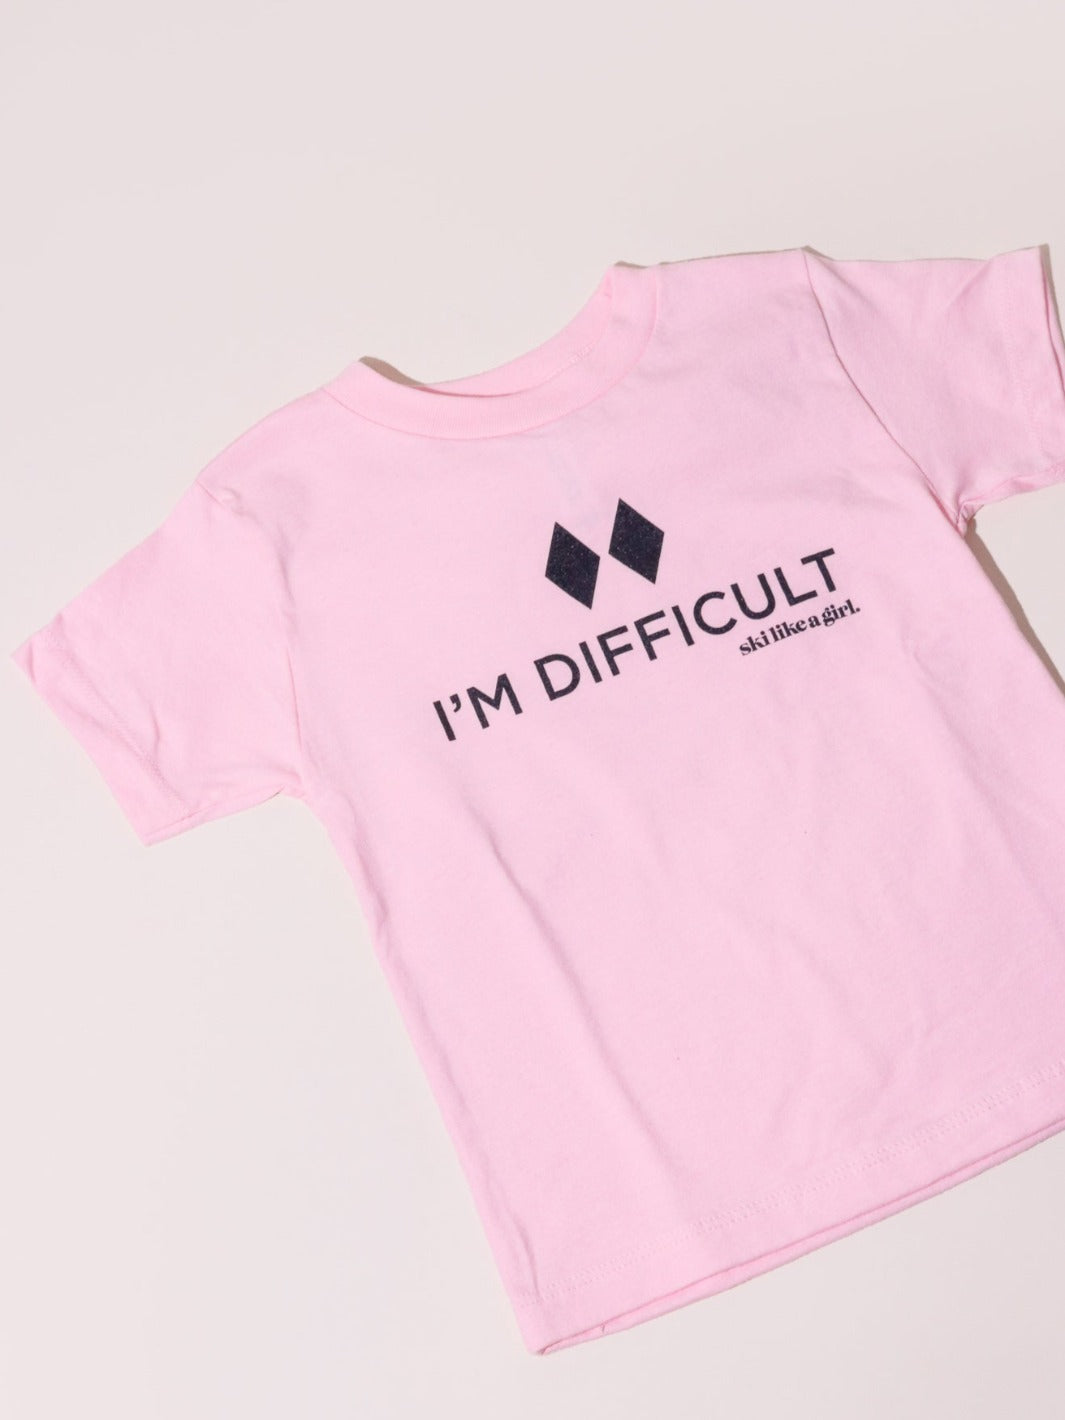 Ski Like a Girl I'm Difficult Toddler Tee in Pink- Heyday Bozeman